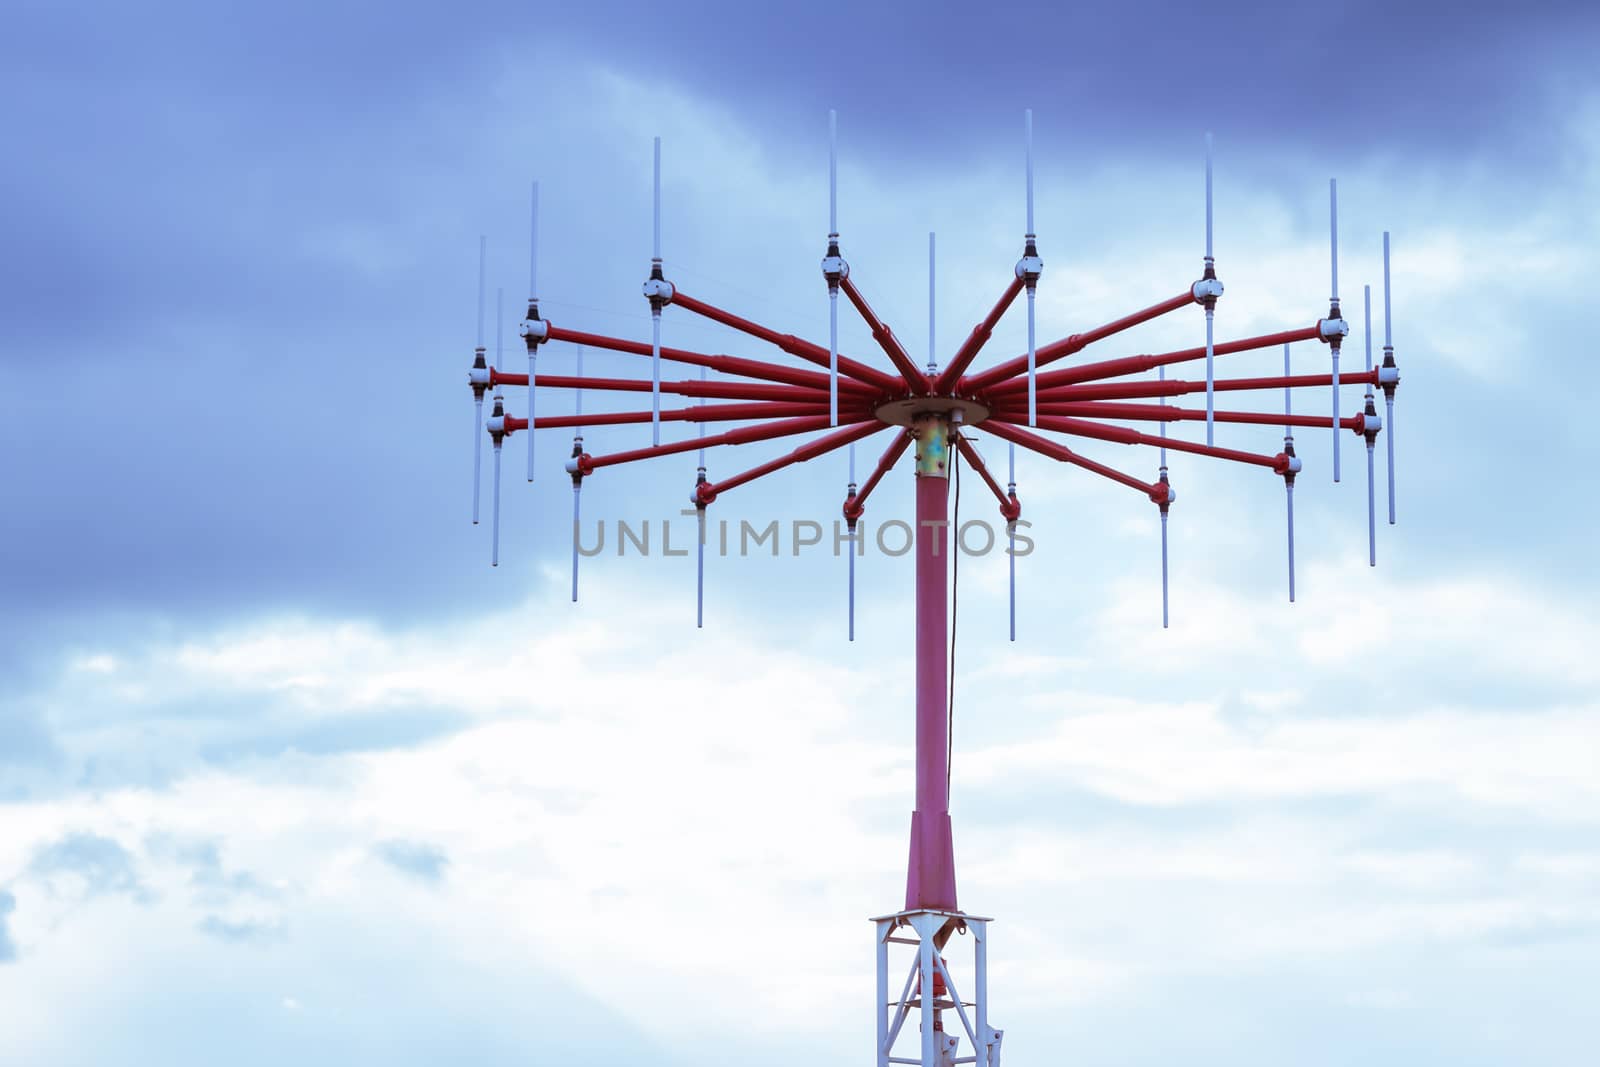 antenna in private airport on cloudy sky background